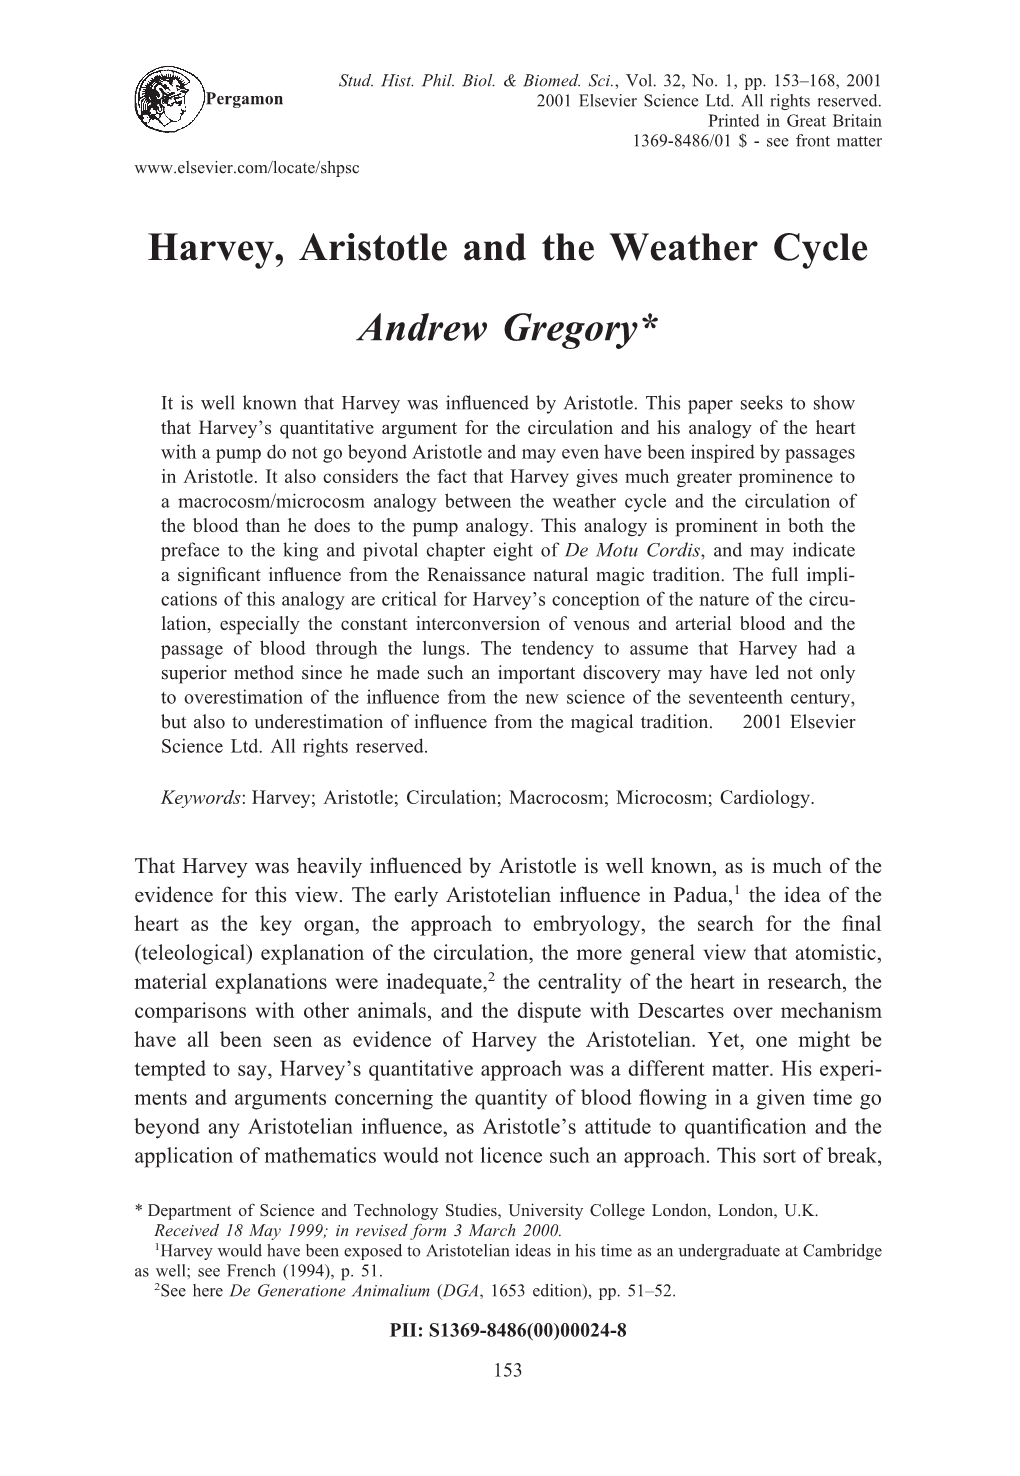 Harvey, Aristotle and the Weather Cycle Andrew Gregory*